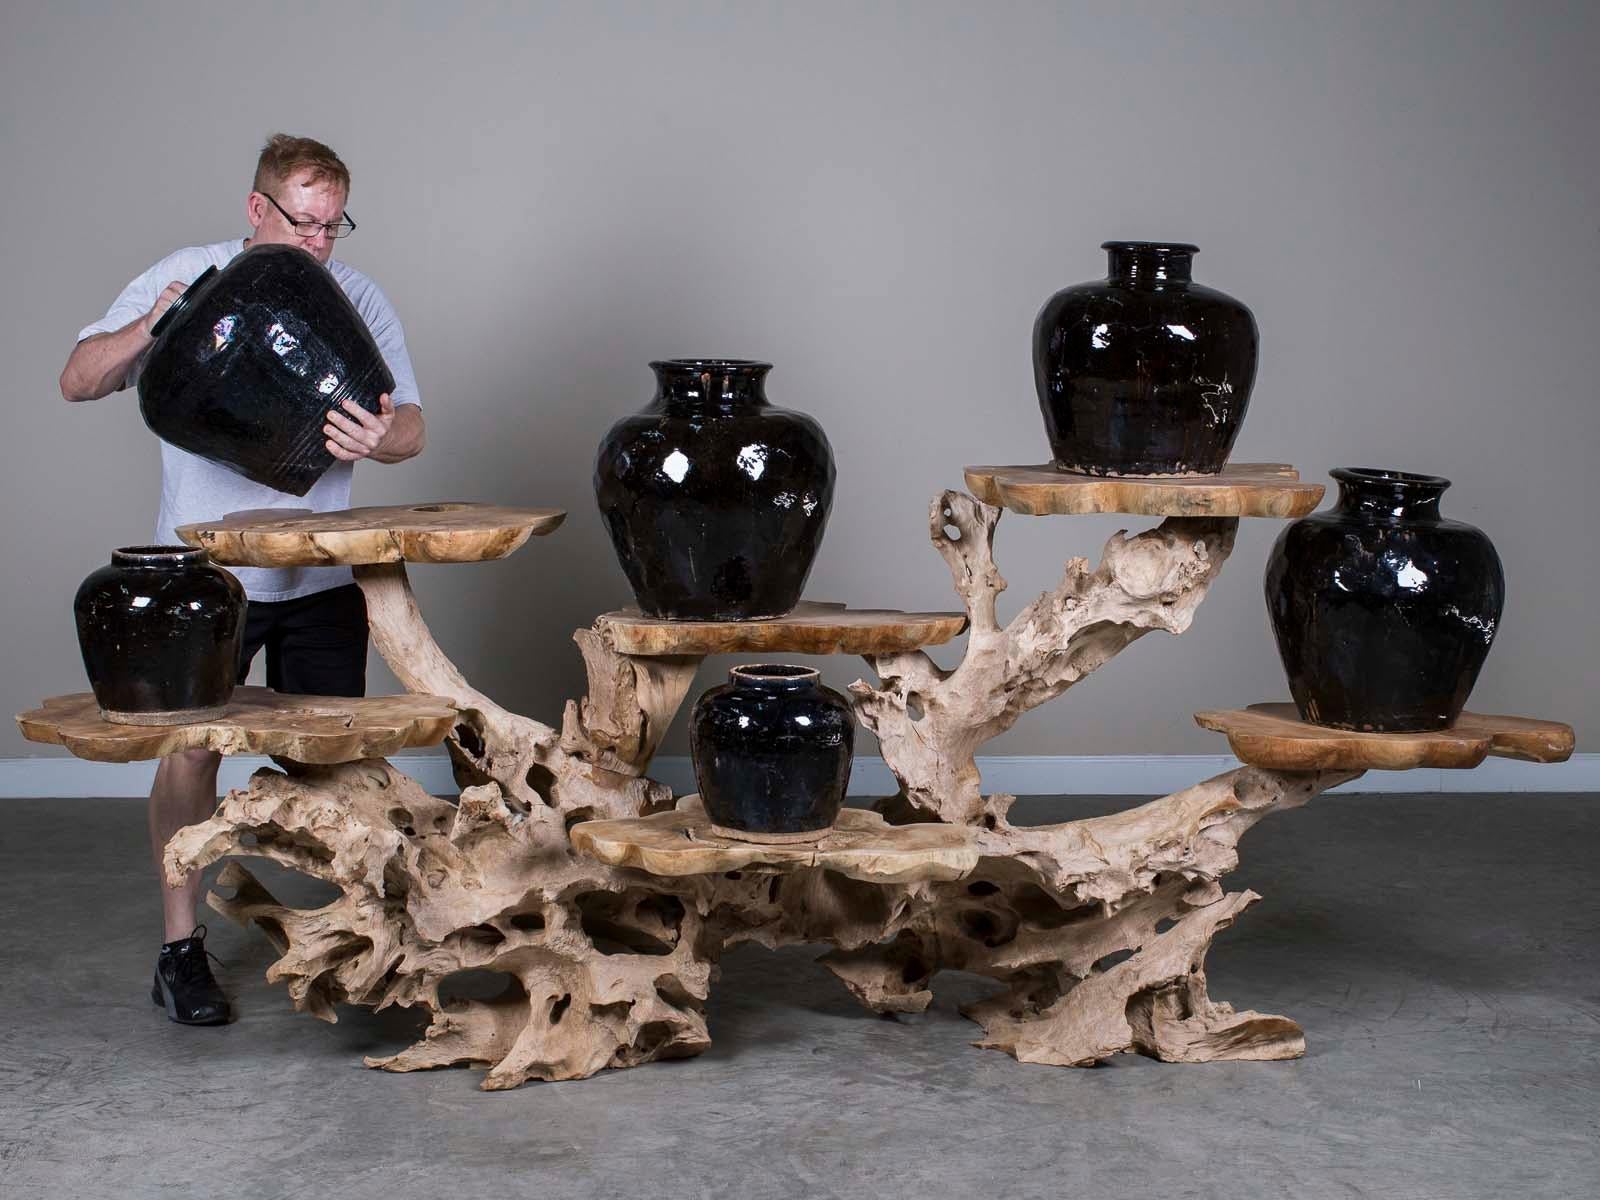 A sensational lychee wood reclaimed timber display serving table featuring six platforms of a natural organic shape. Please notice the artistic manner in which this table was designed to display and serve by the arrangement of the six asymmetrically